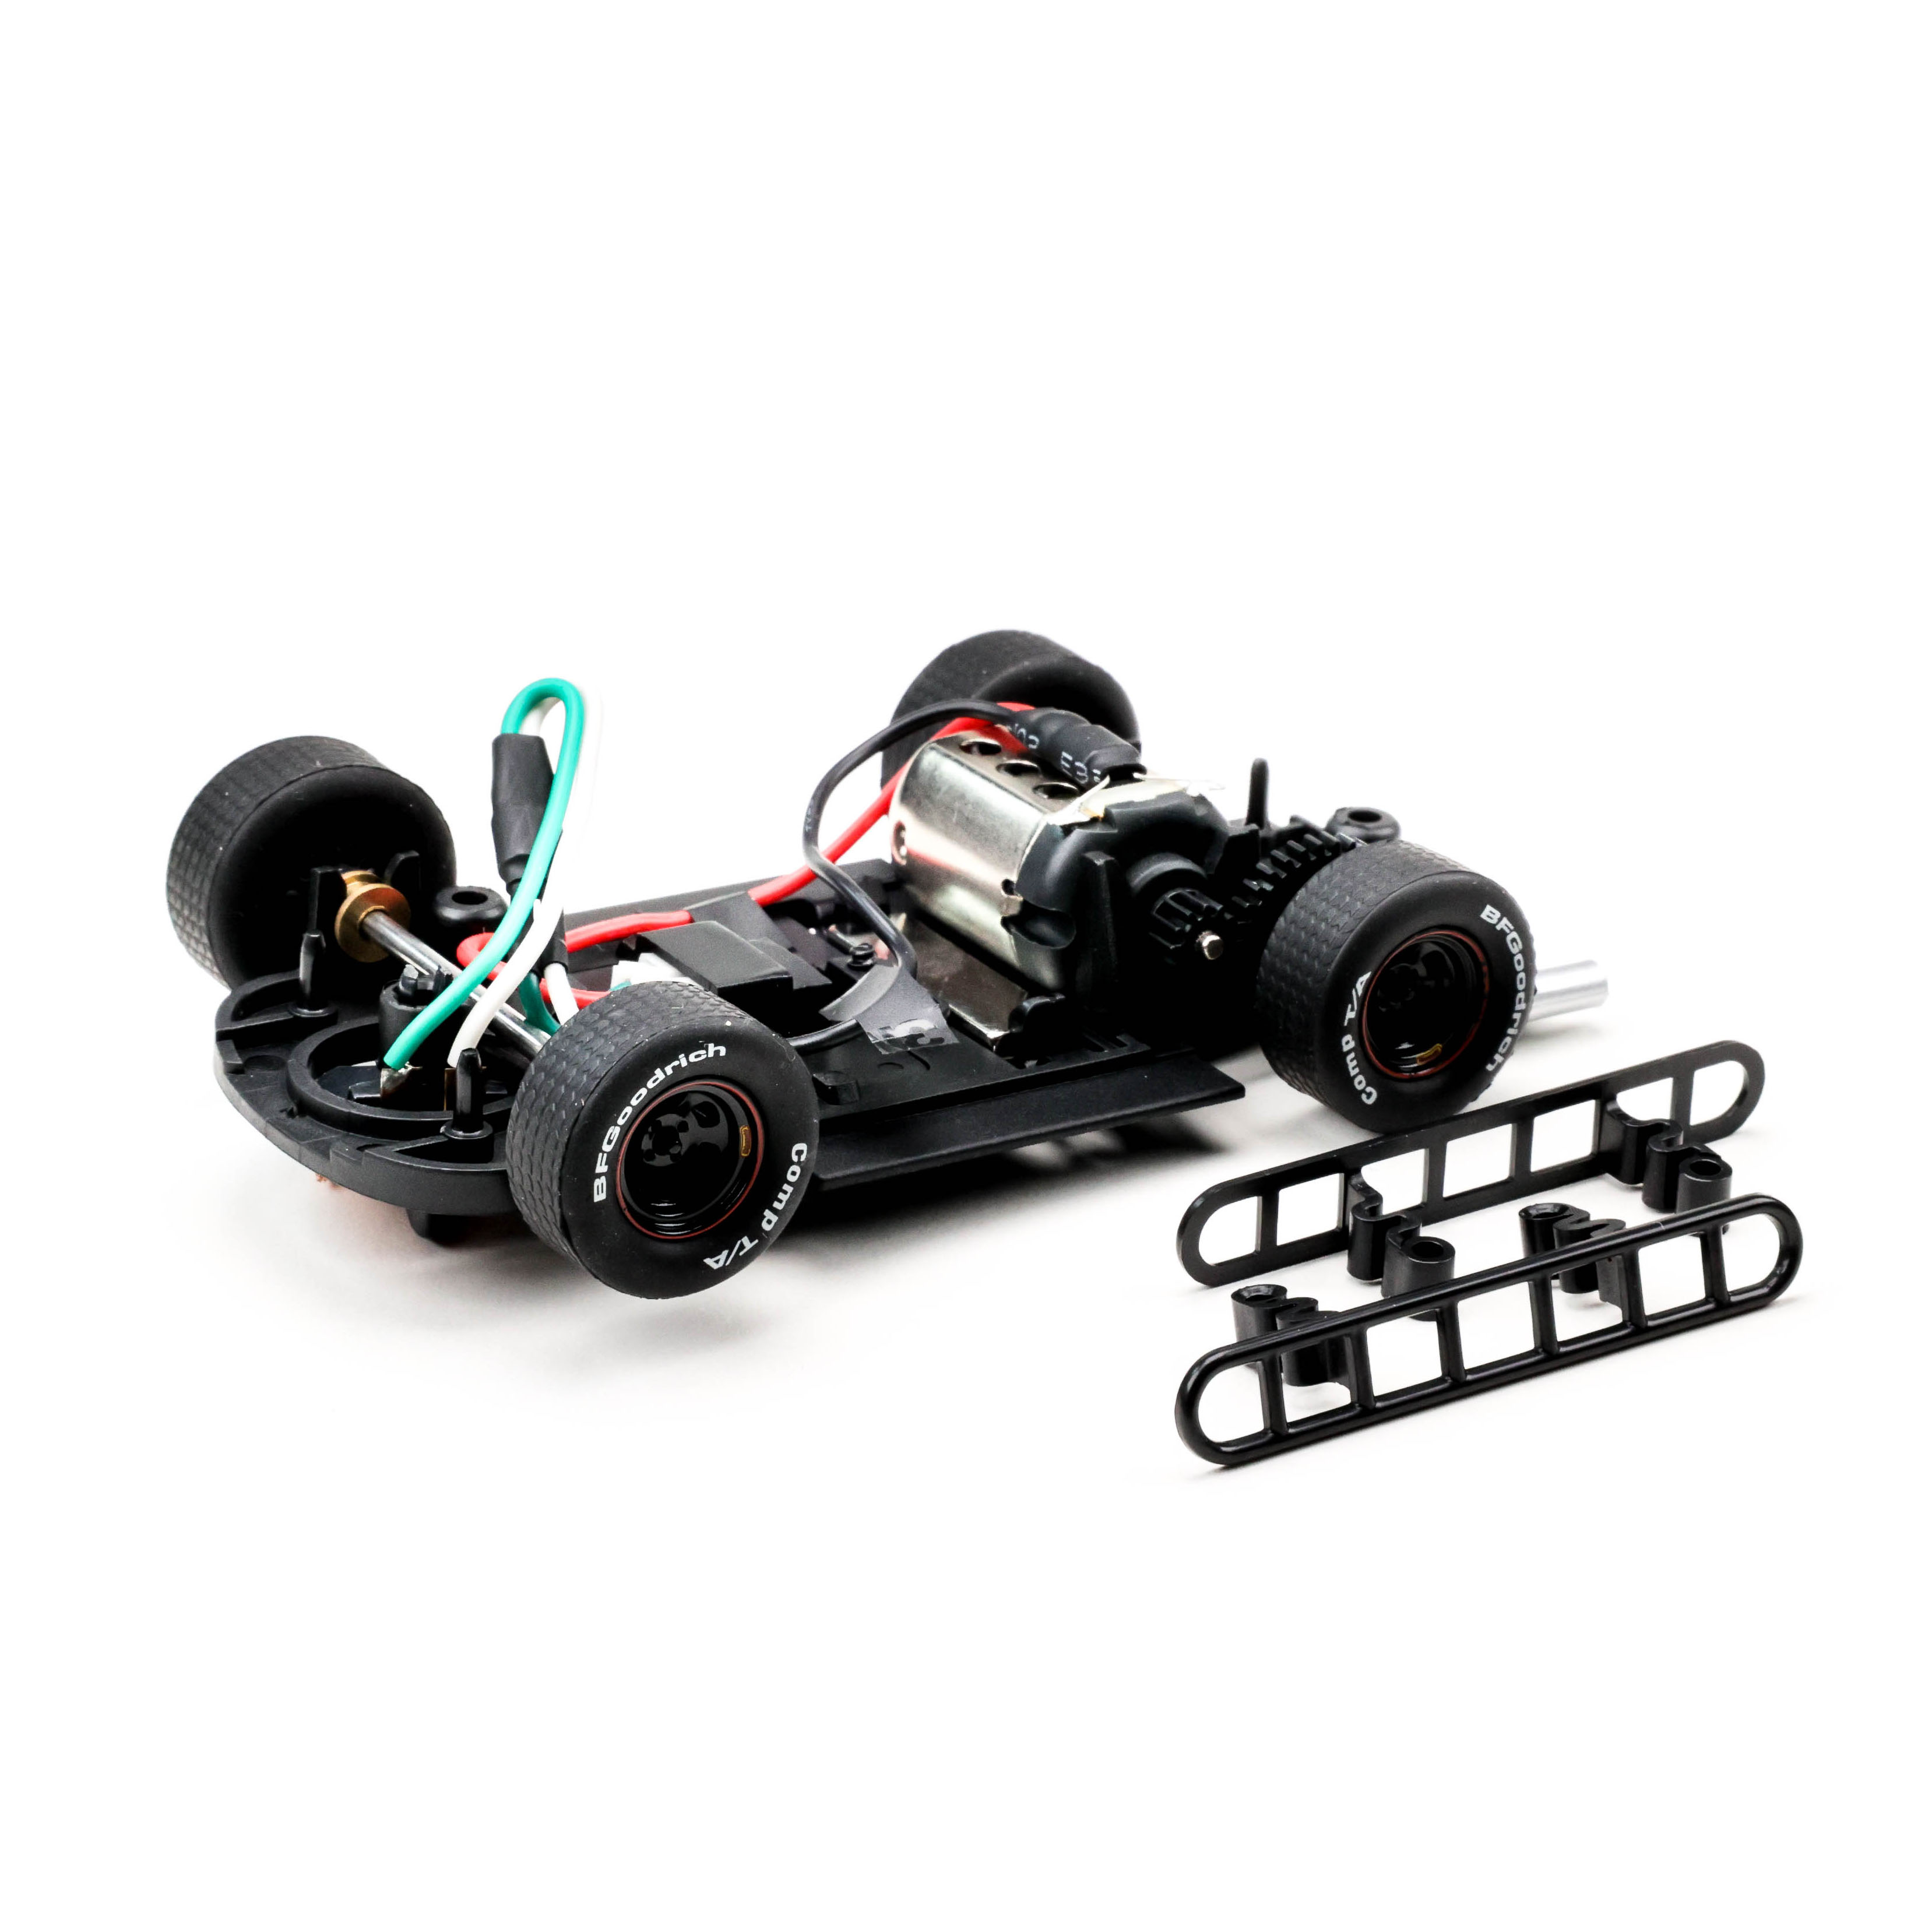 Pioneer CH205051 - Legends Racers Complete RTR Chassis, Black 'Bassett'-style Wheels